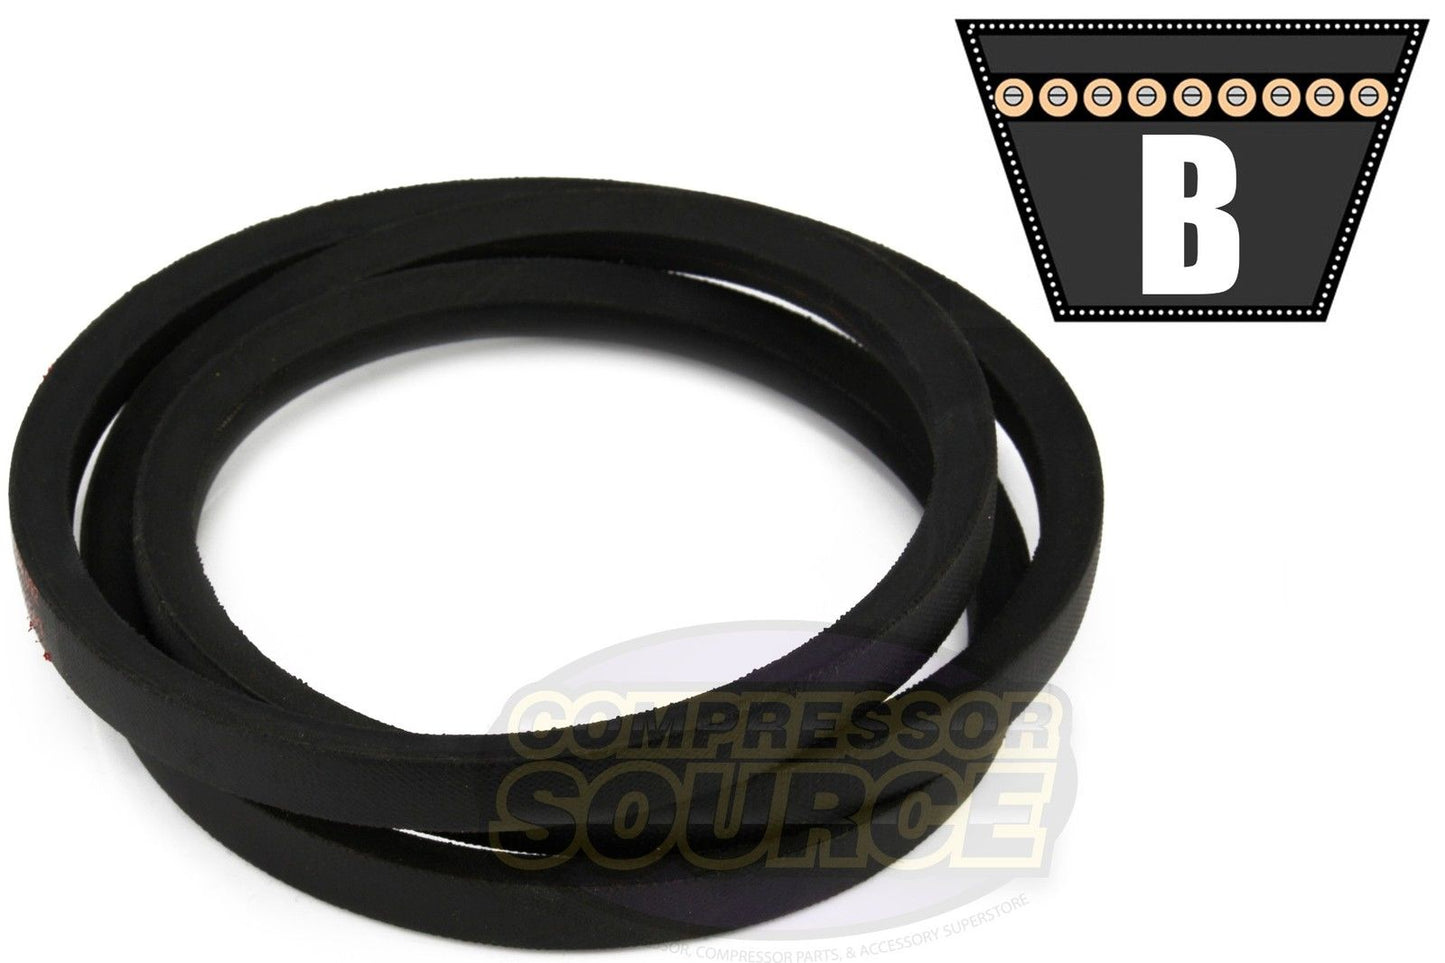 B67 Replacement High Quality Industrial & Lawn Mower 5/8" x 70"  V Belt 5L700